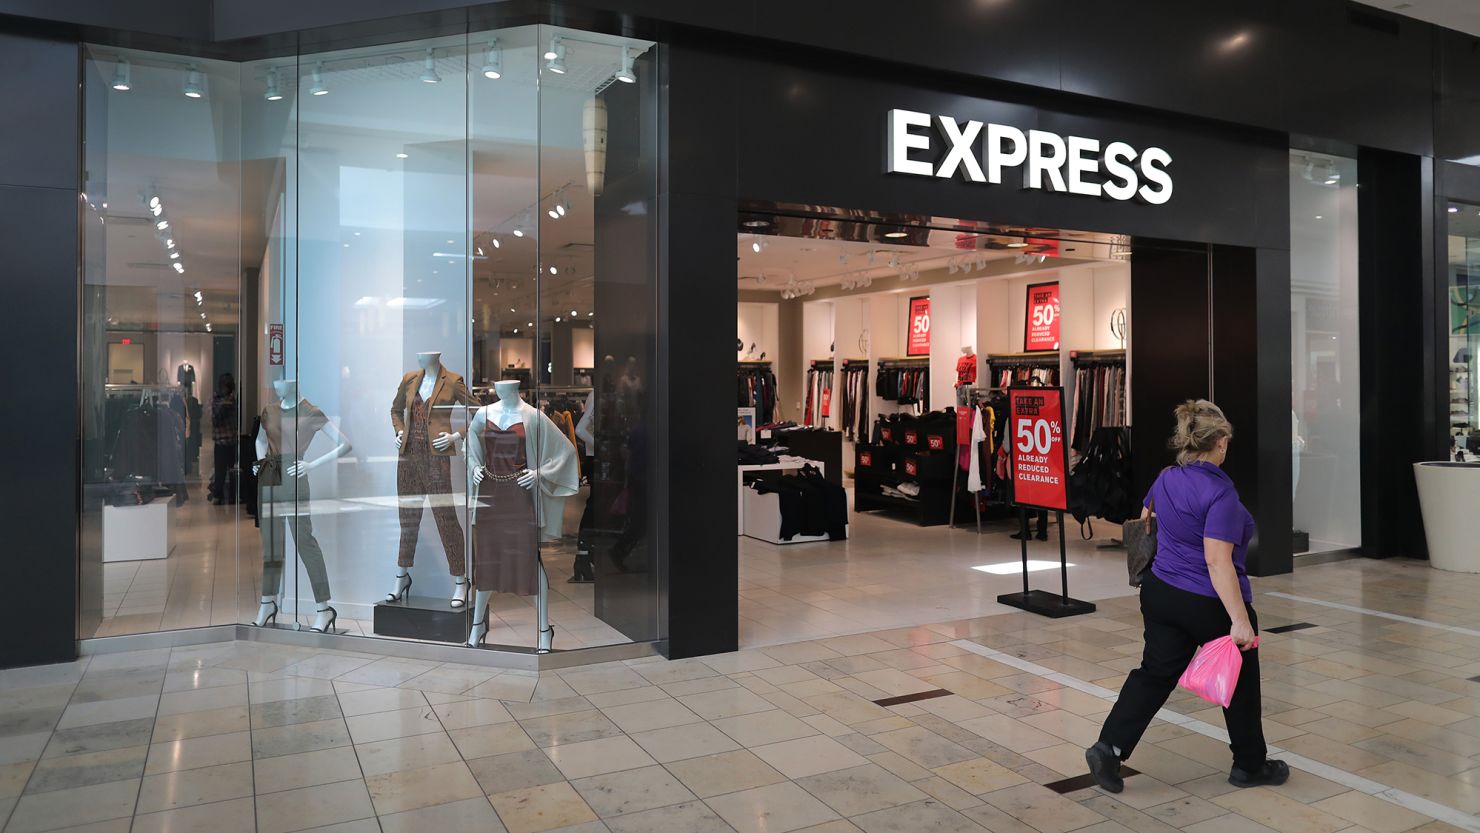 Express inc. has filed for bankruptcy and will close 95 Express locations.